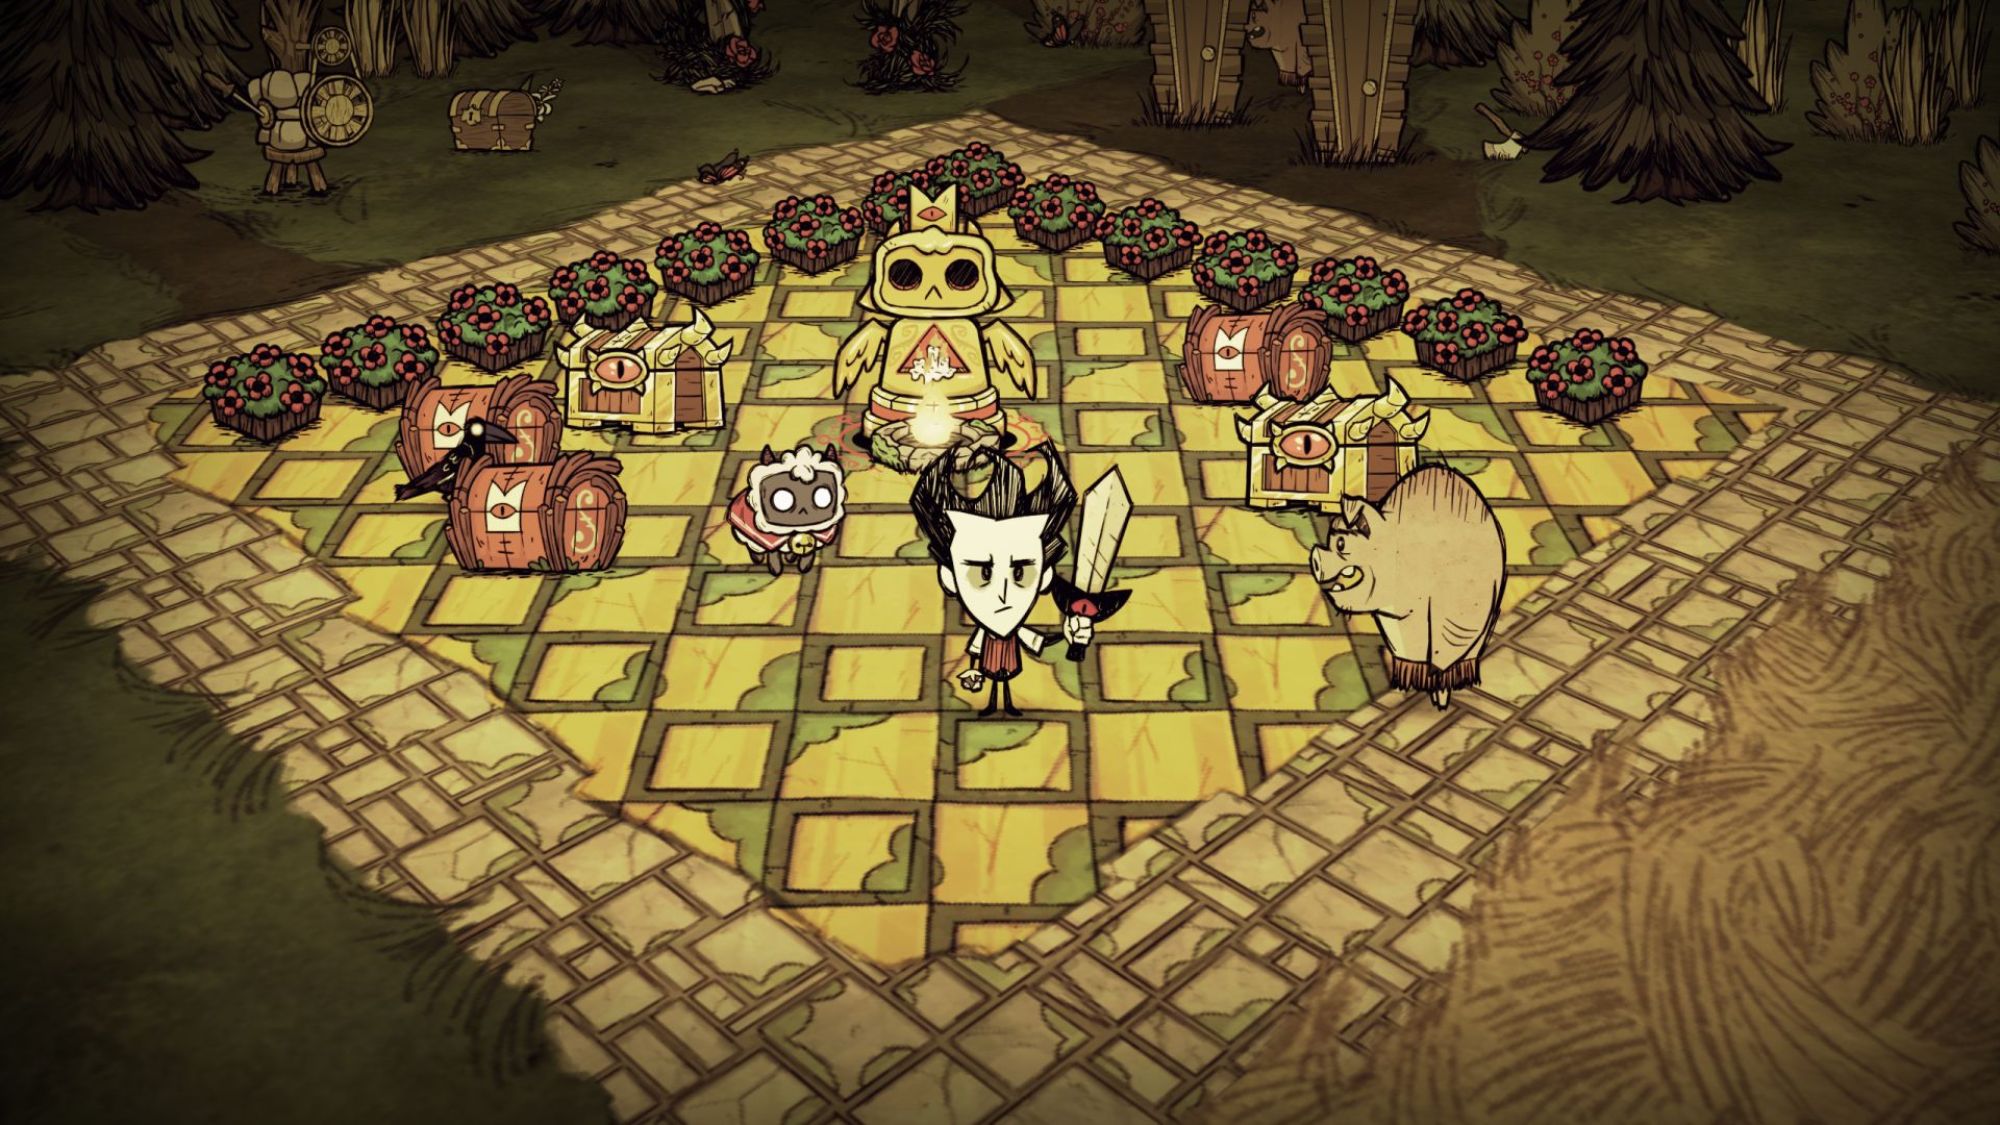 Since we already have a crossover with Don't Starve, what other